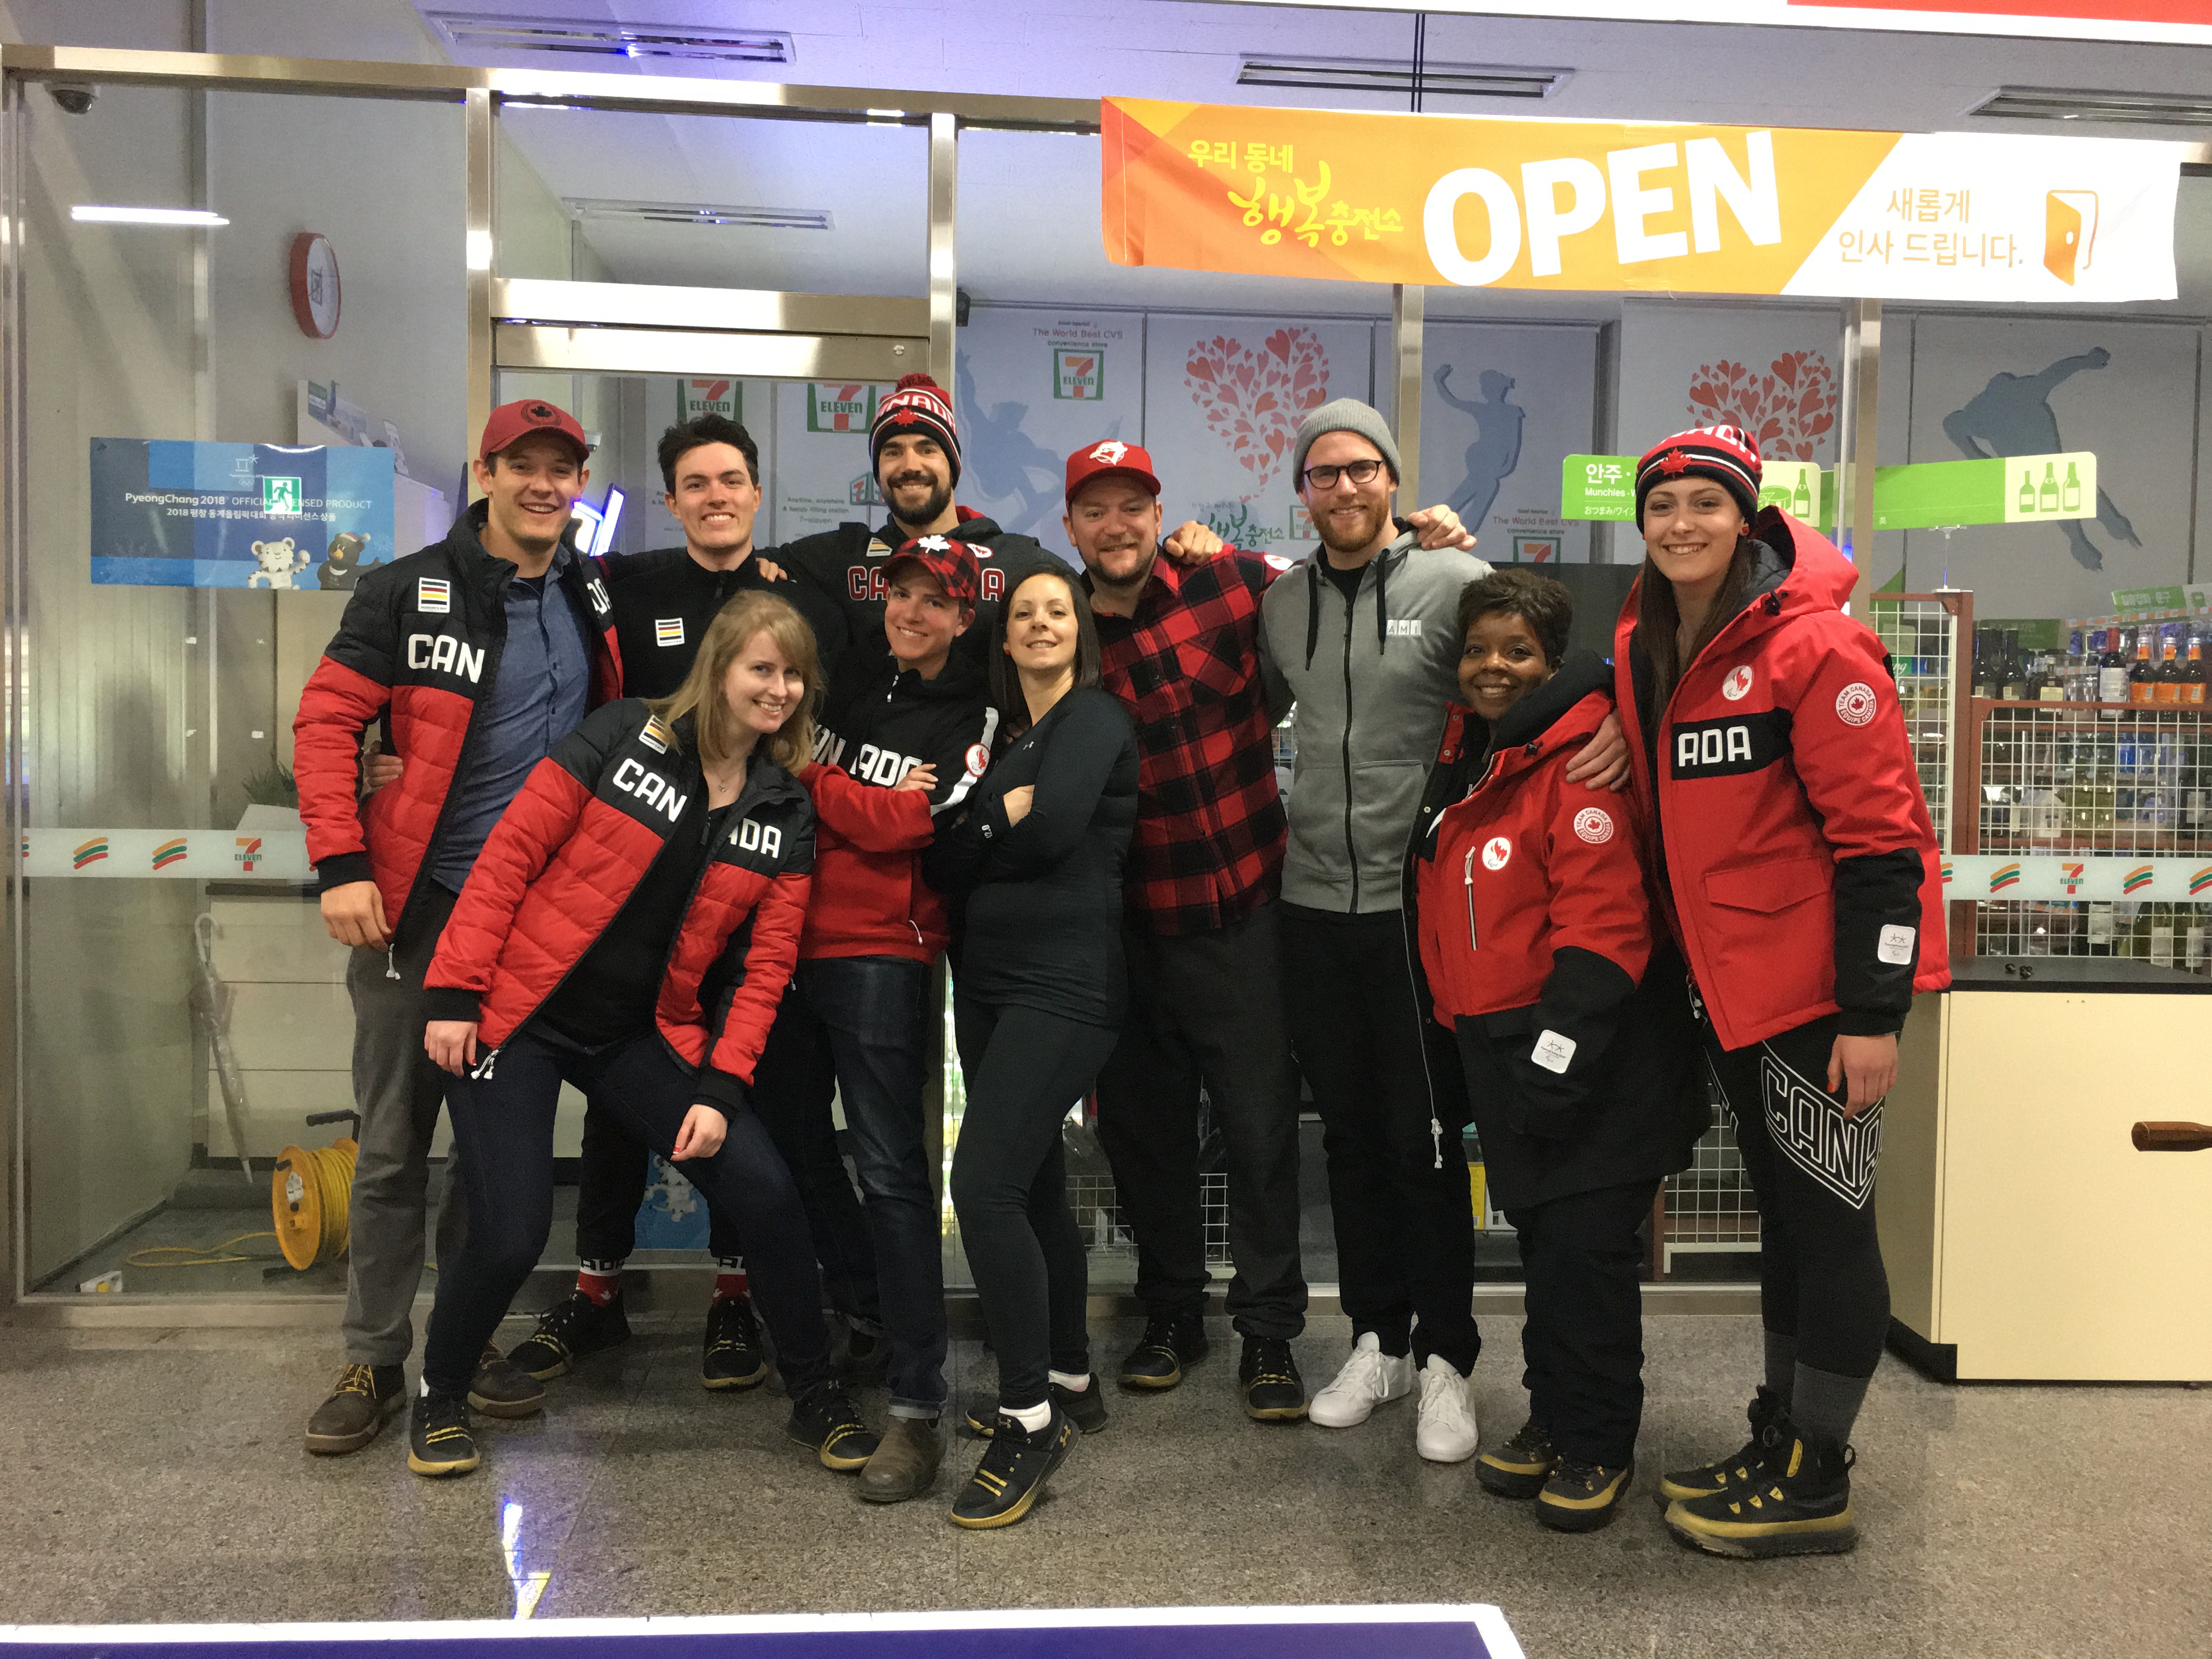 A group of media personnel posing for a photo including Anthony McLachlan and Matthew McGurk and Emily Harding from Accessible Media Inc. Many in the photo are wearing team Canada gear.  